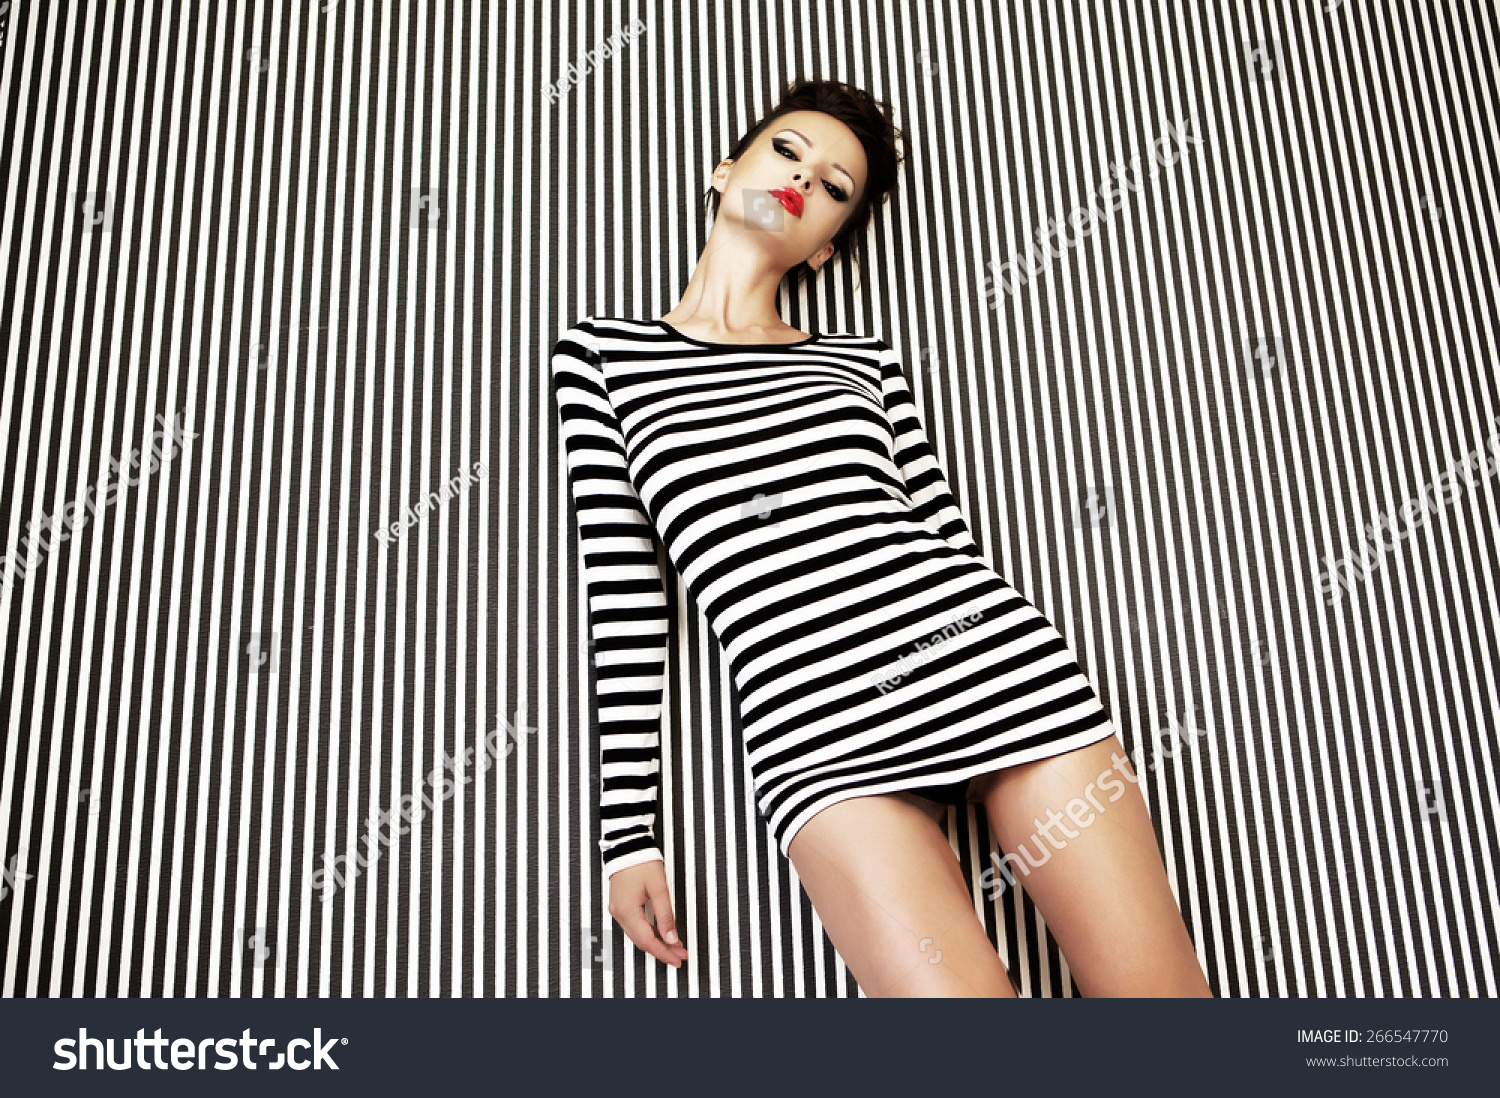 fashion woman in striped dress on striped background in studio #266547770